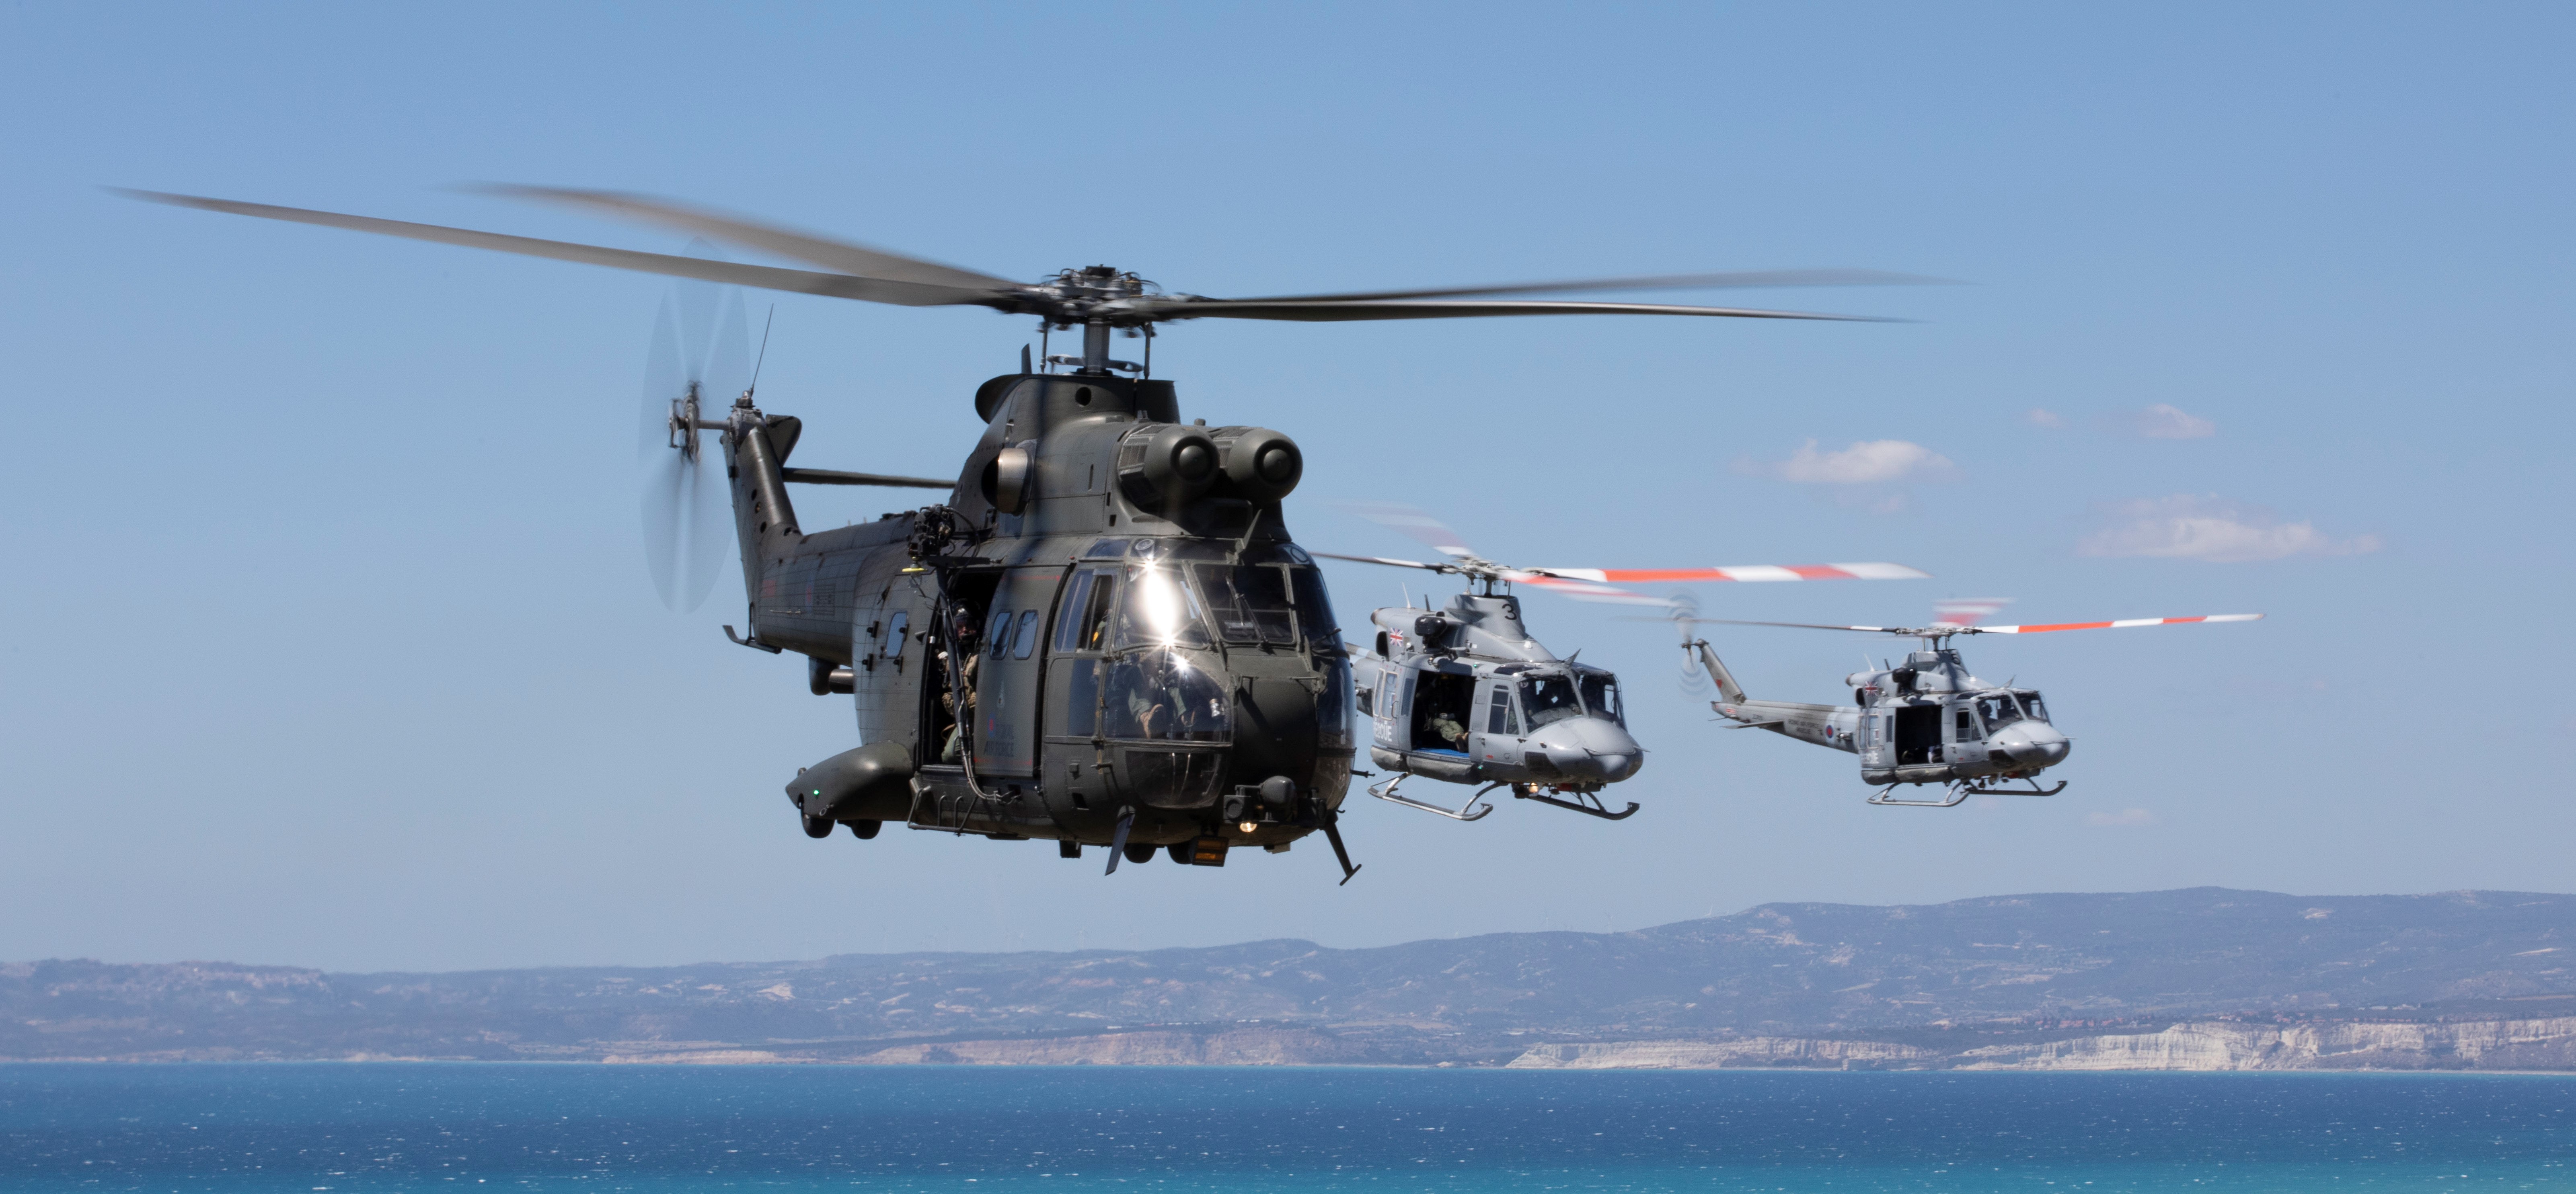 Image shows RAF Puma and Griffin helicopters in flight over the water.